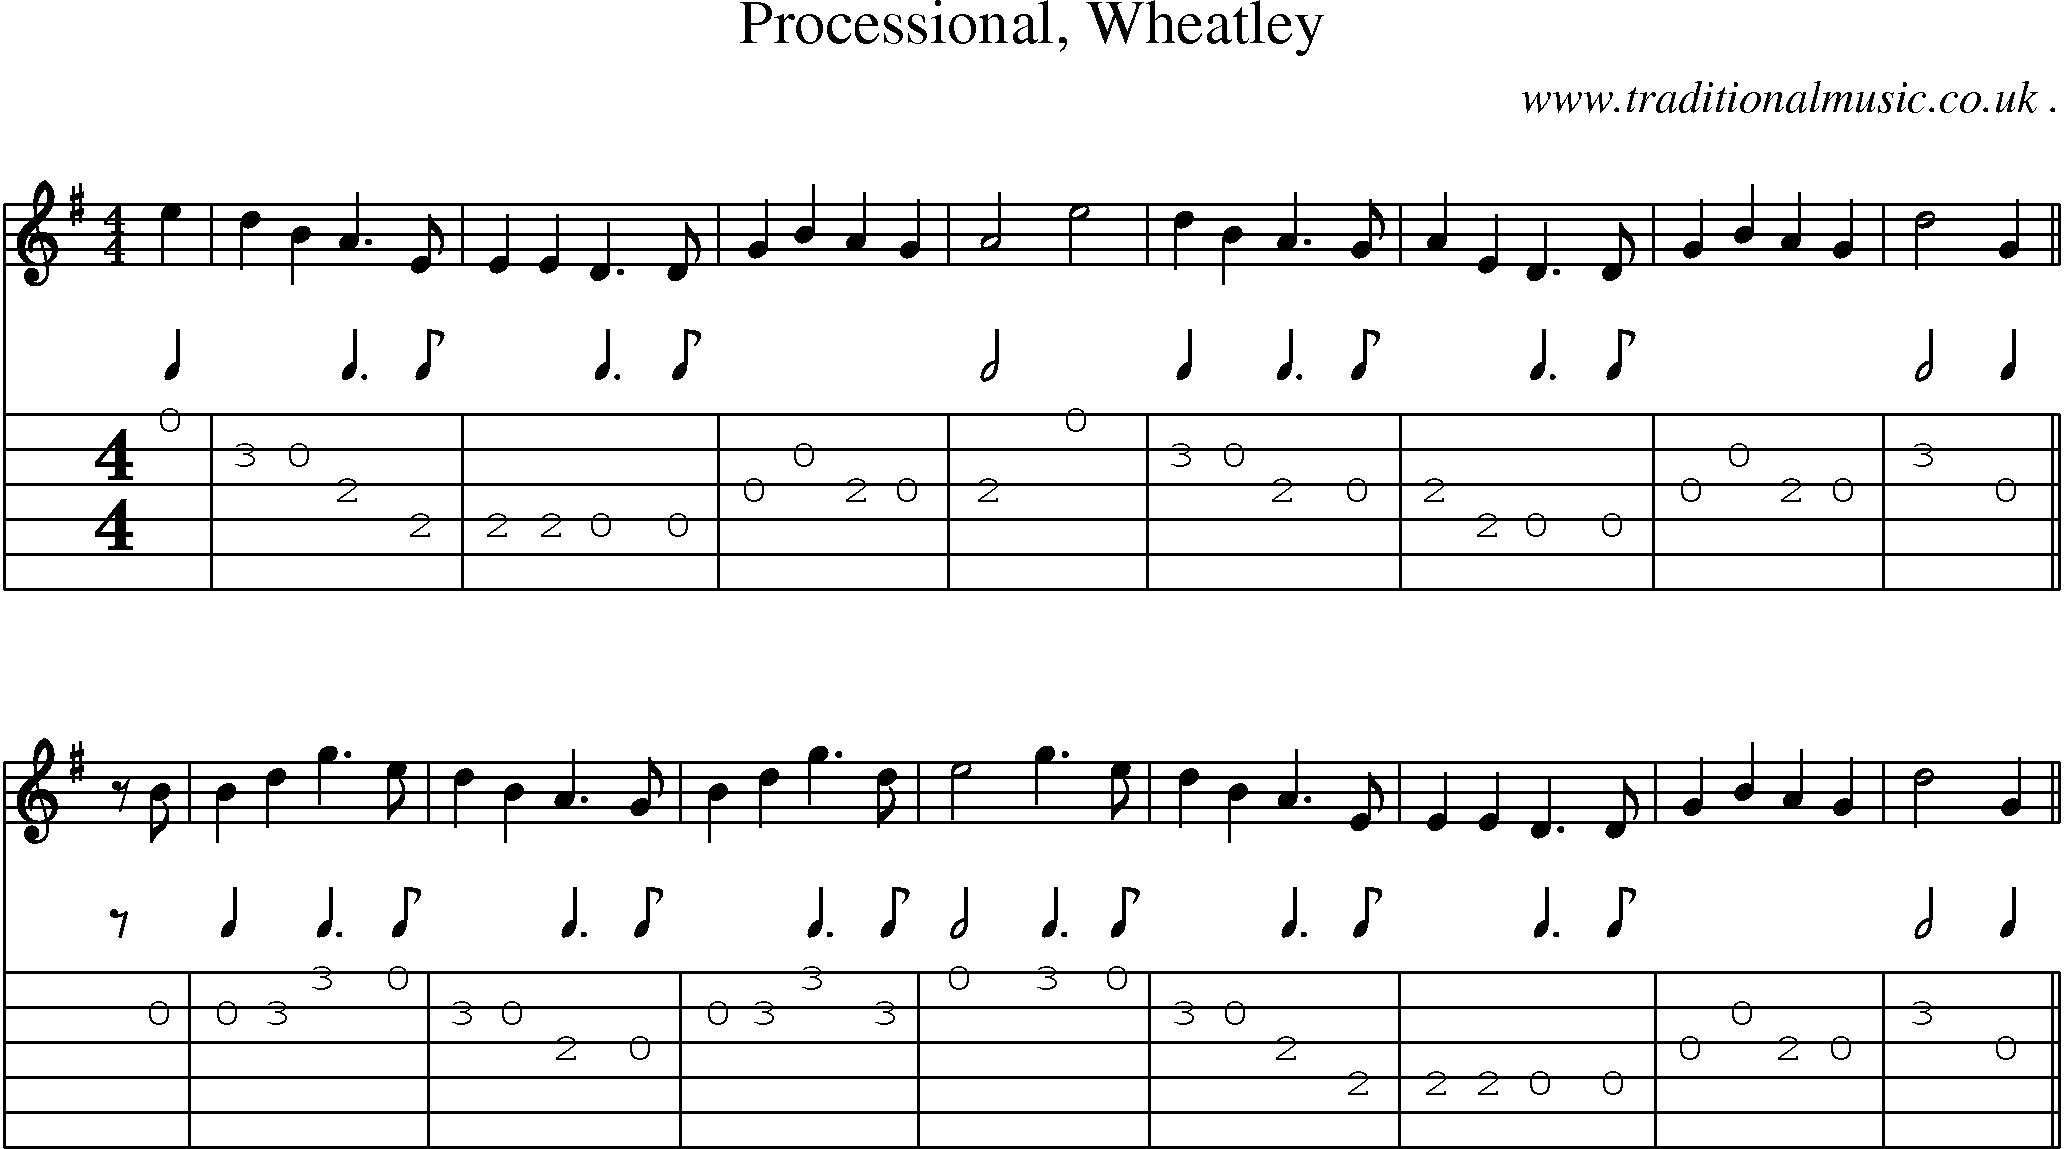 Sheet-Music and Guitar Tabs for Processional Wheatley